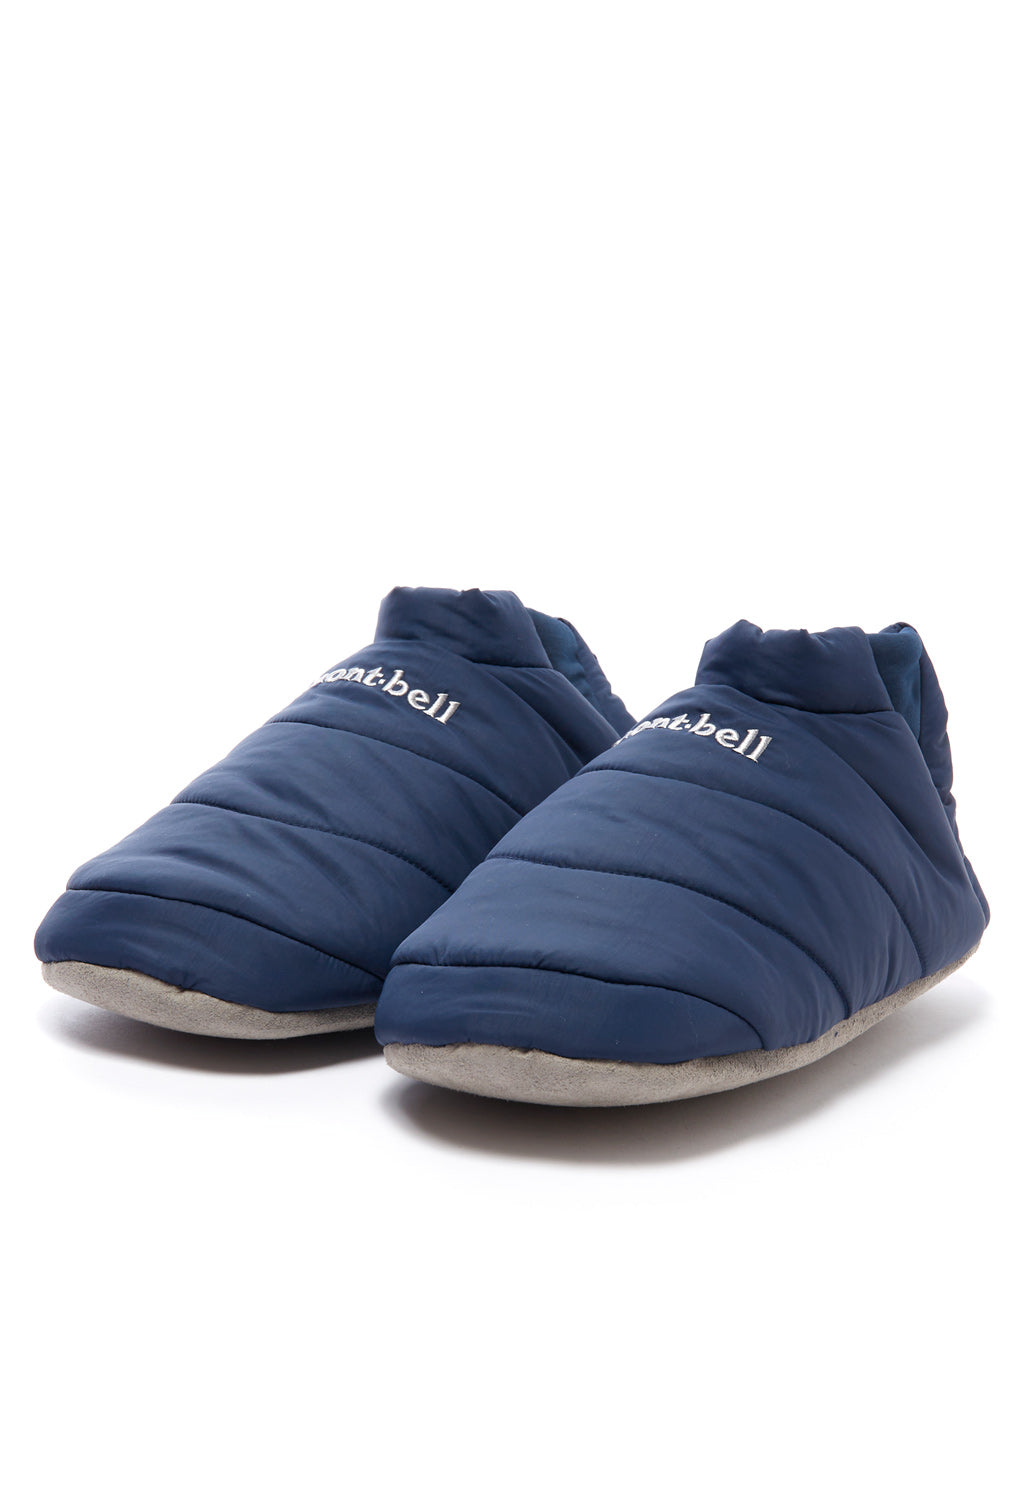 Montbell Exceloft Camp Shoes - Navy